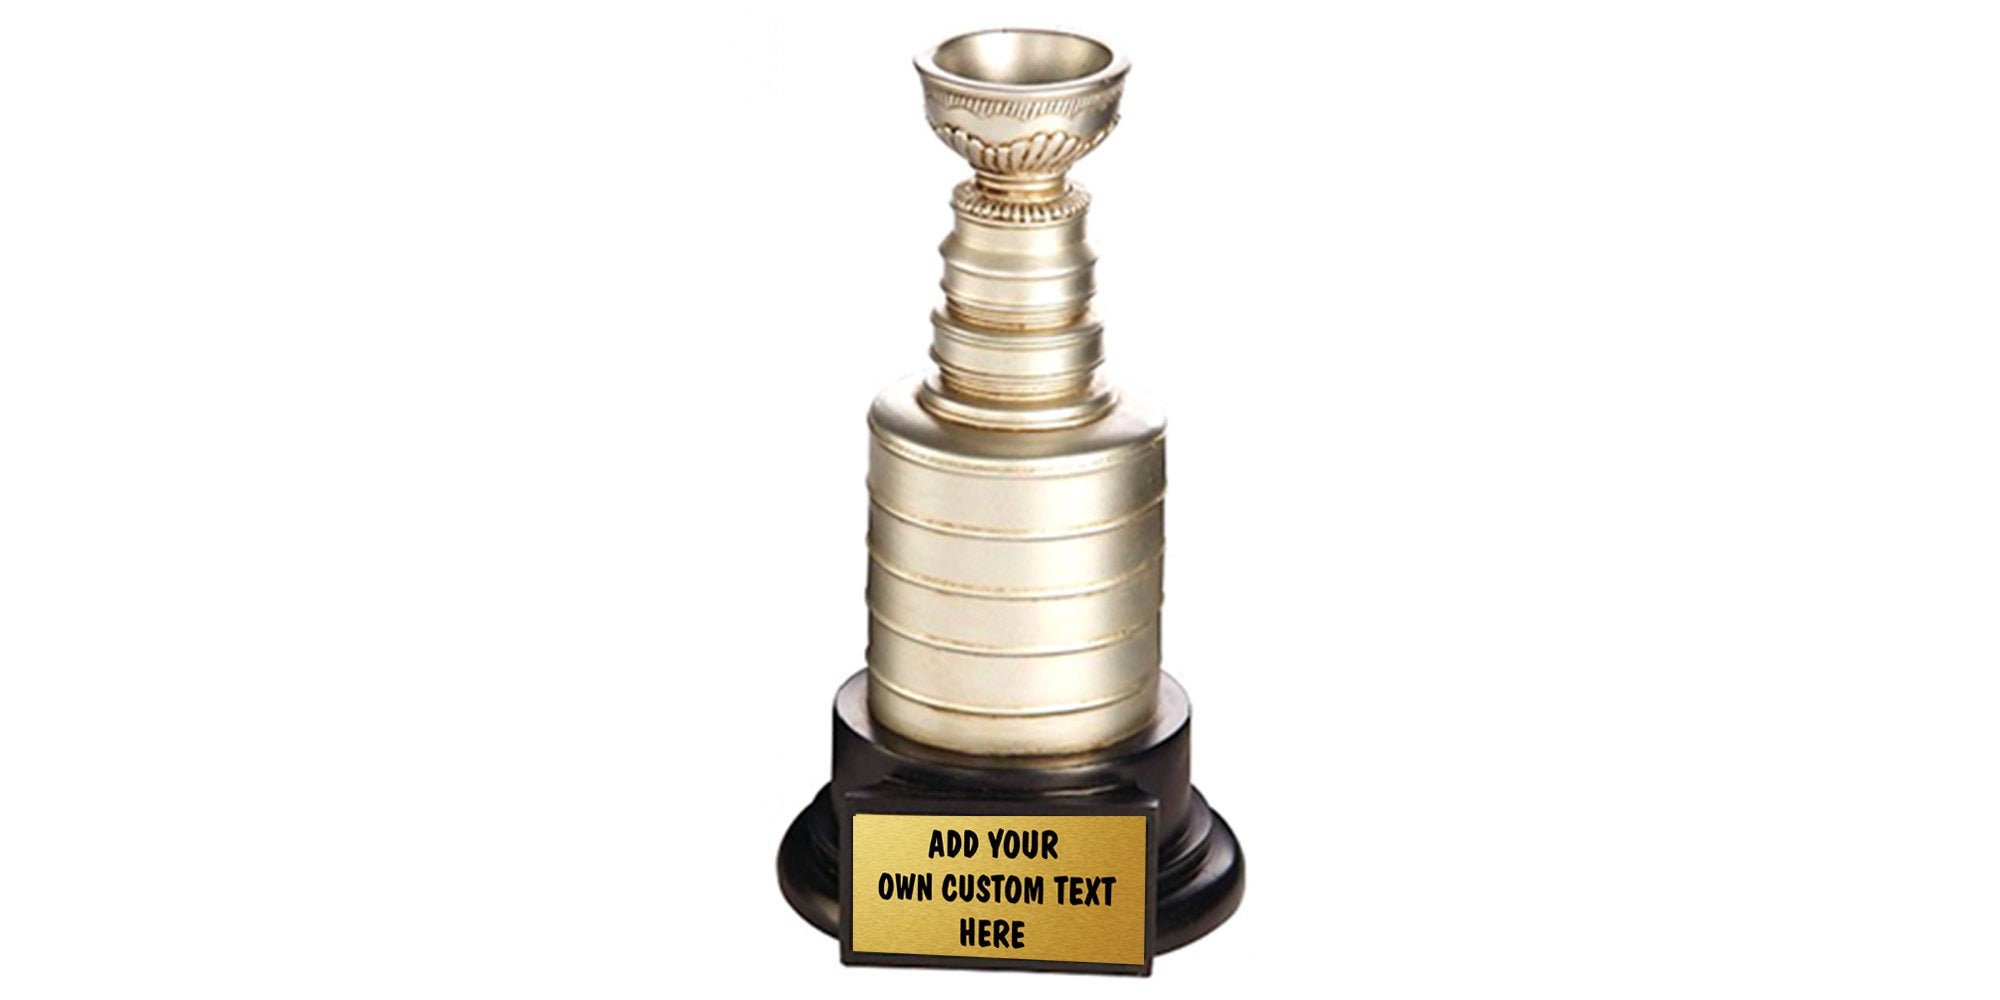 Lord Stanley Cup Replica